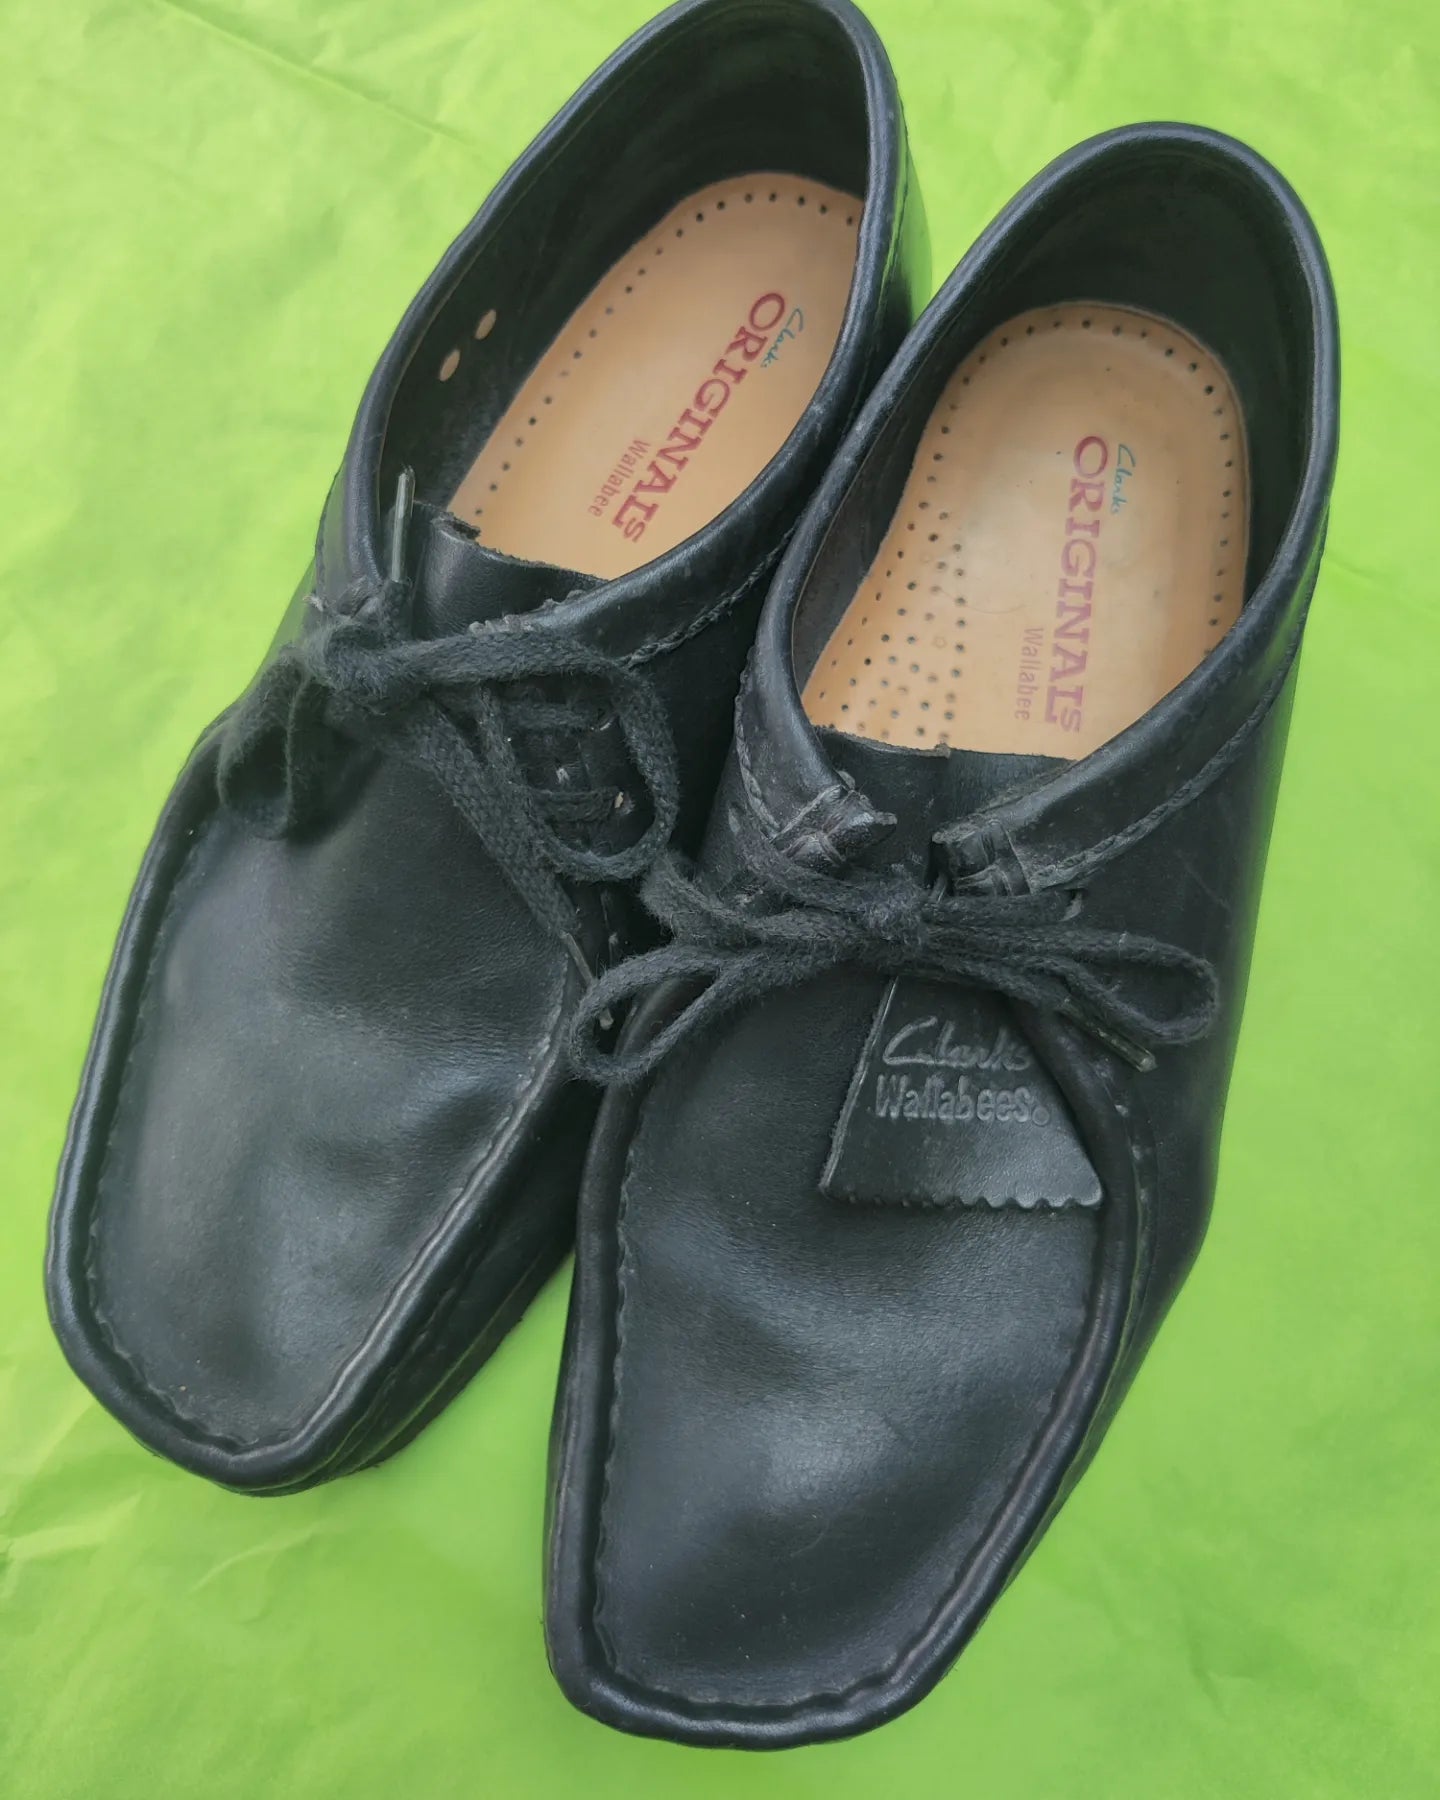 Clarks Wallabees size 6 in black